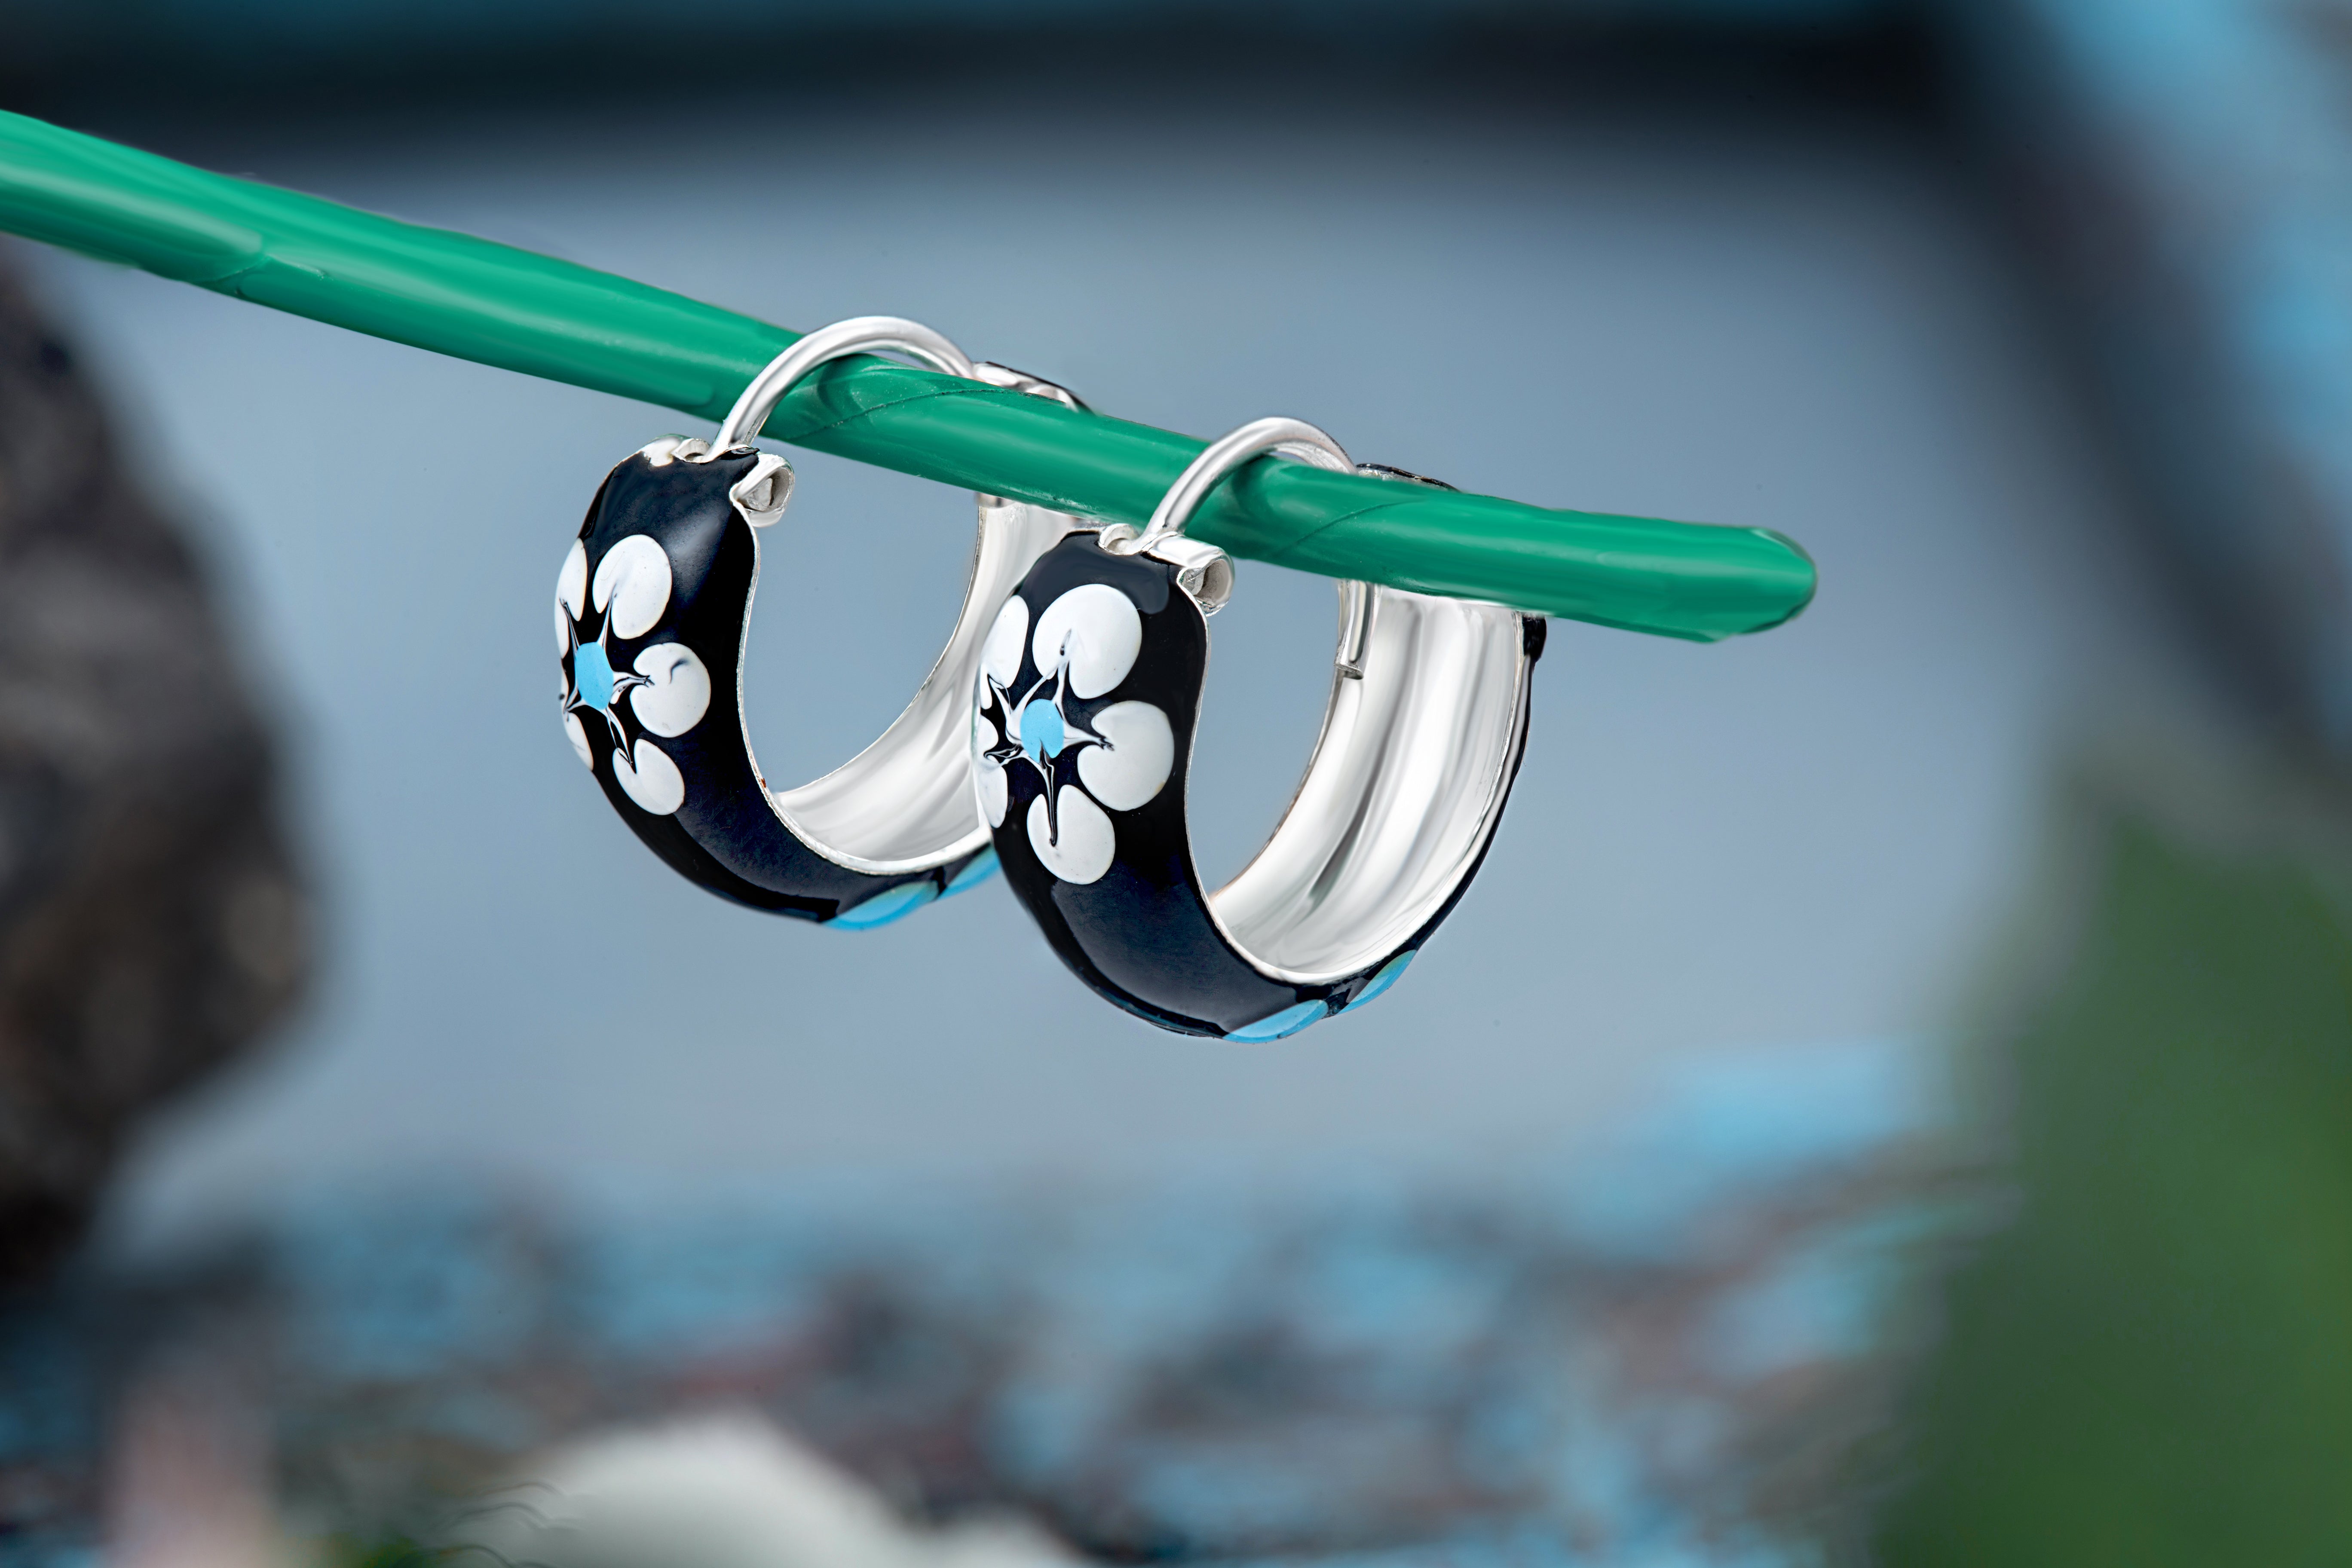 92.5 sterling silver hoops/baali with enamel and printed flowers finished in silver and hinged back closure 